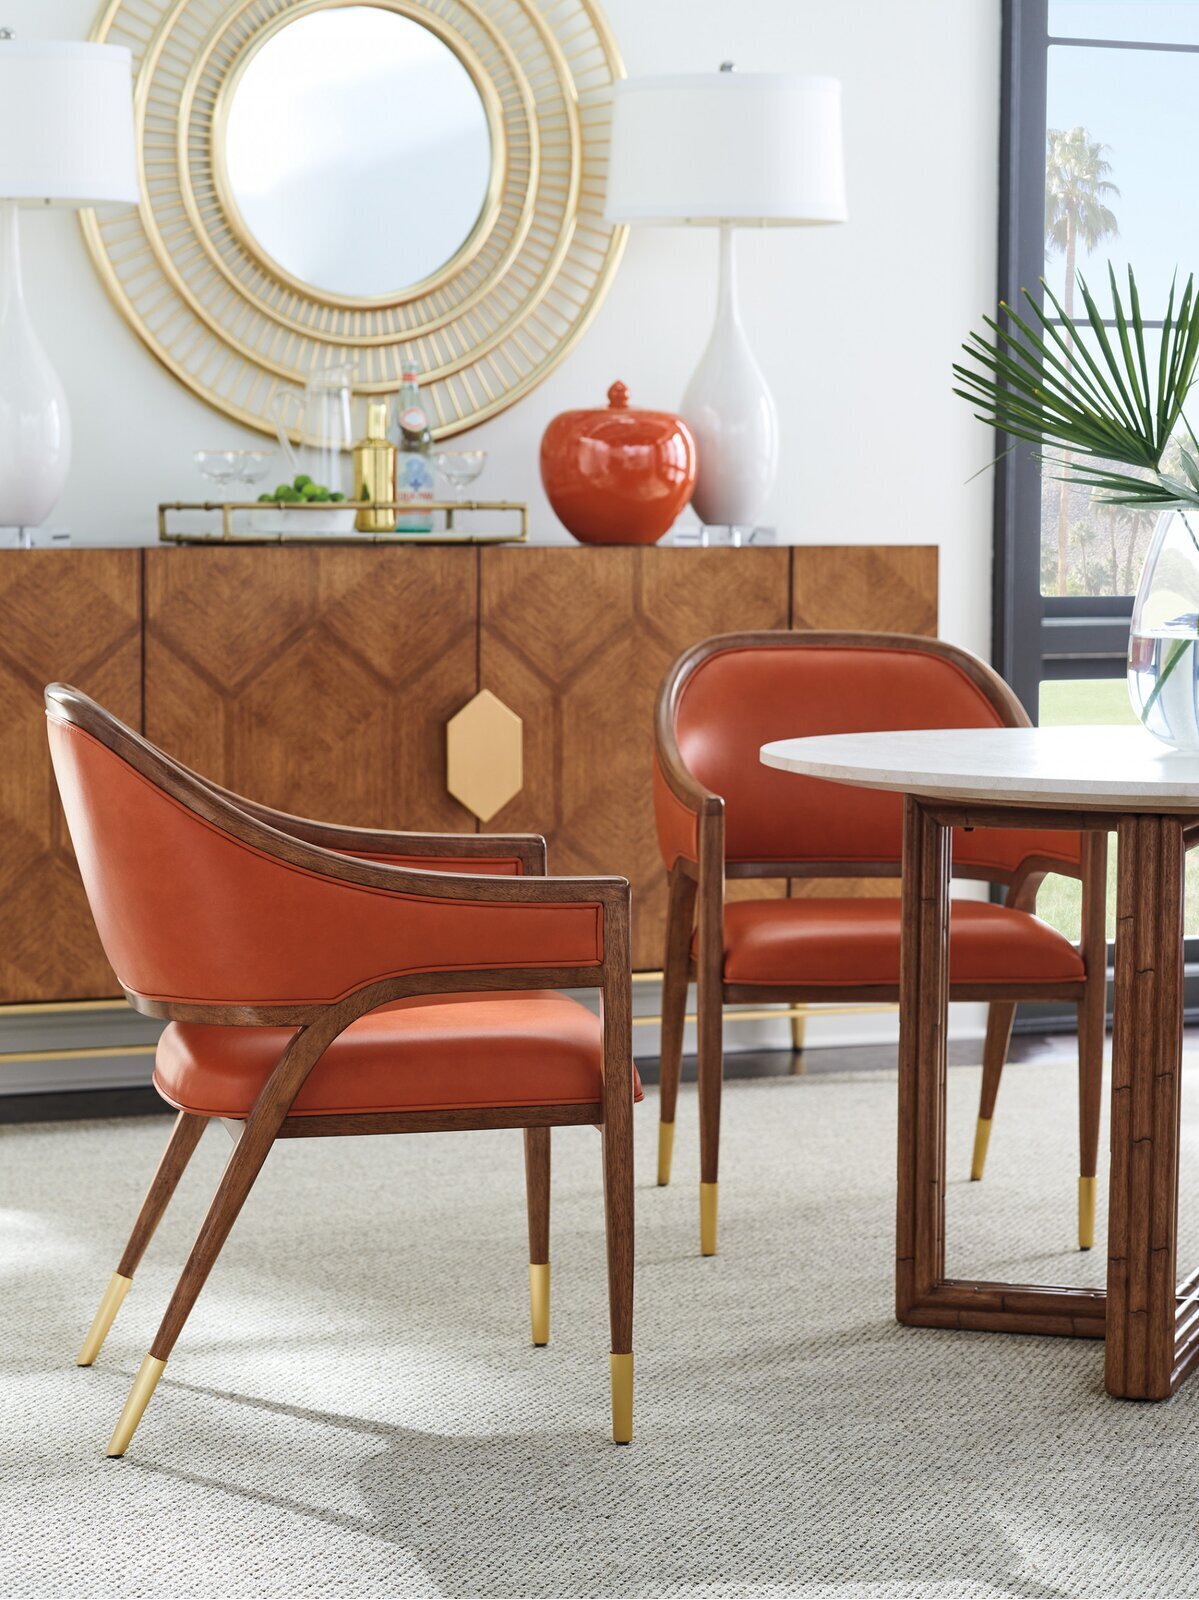 Eye Catching Orange Coastal Dining Chair with Arms